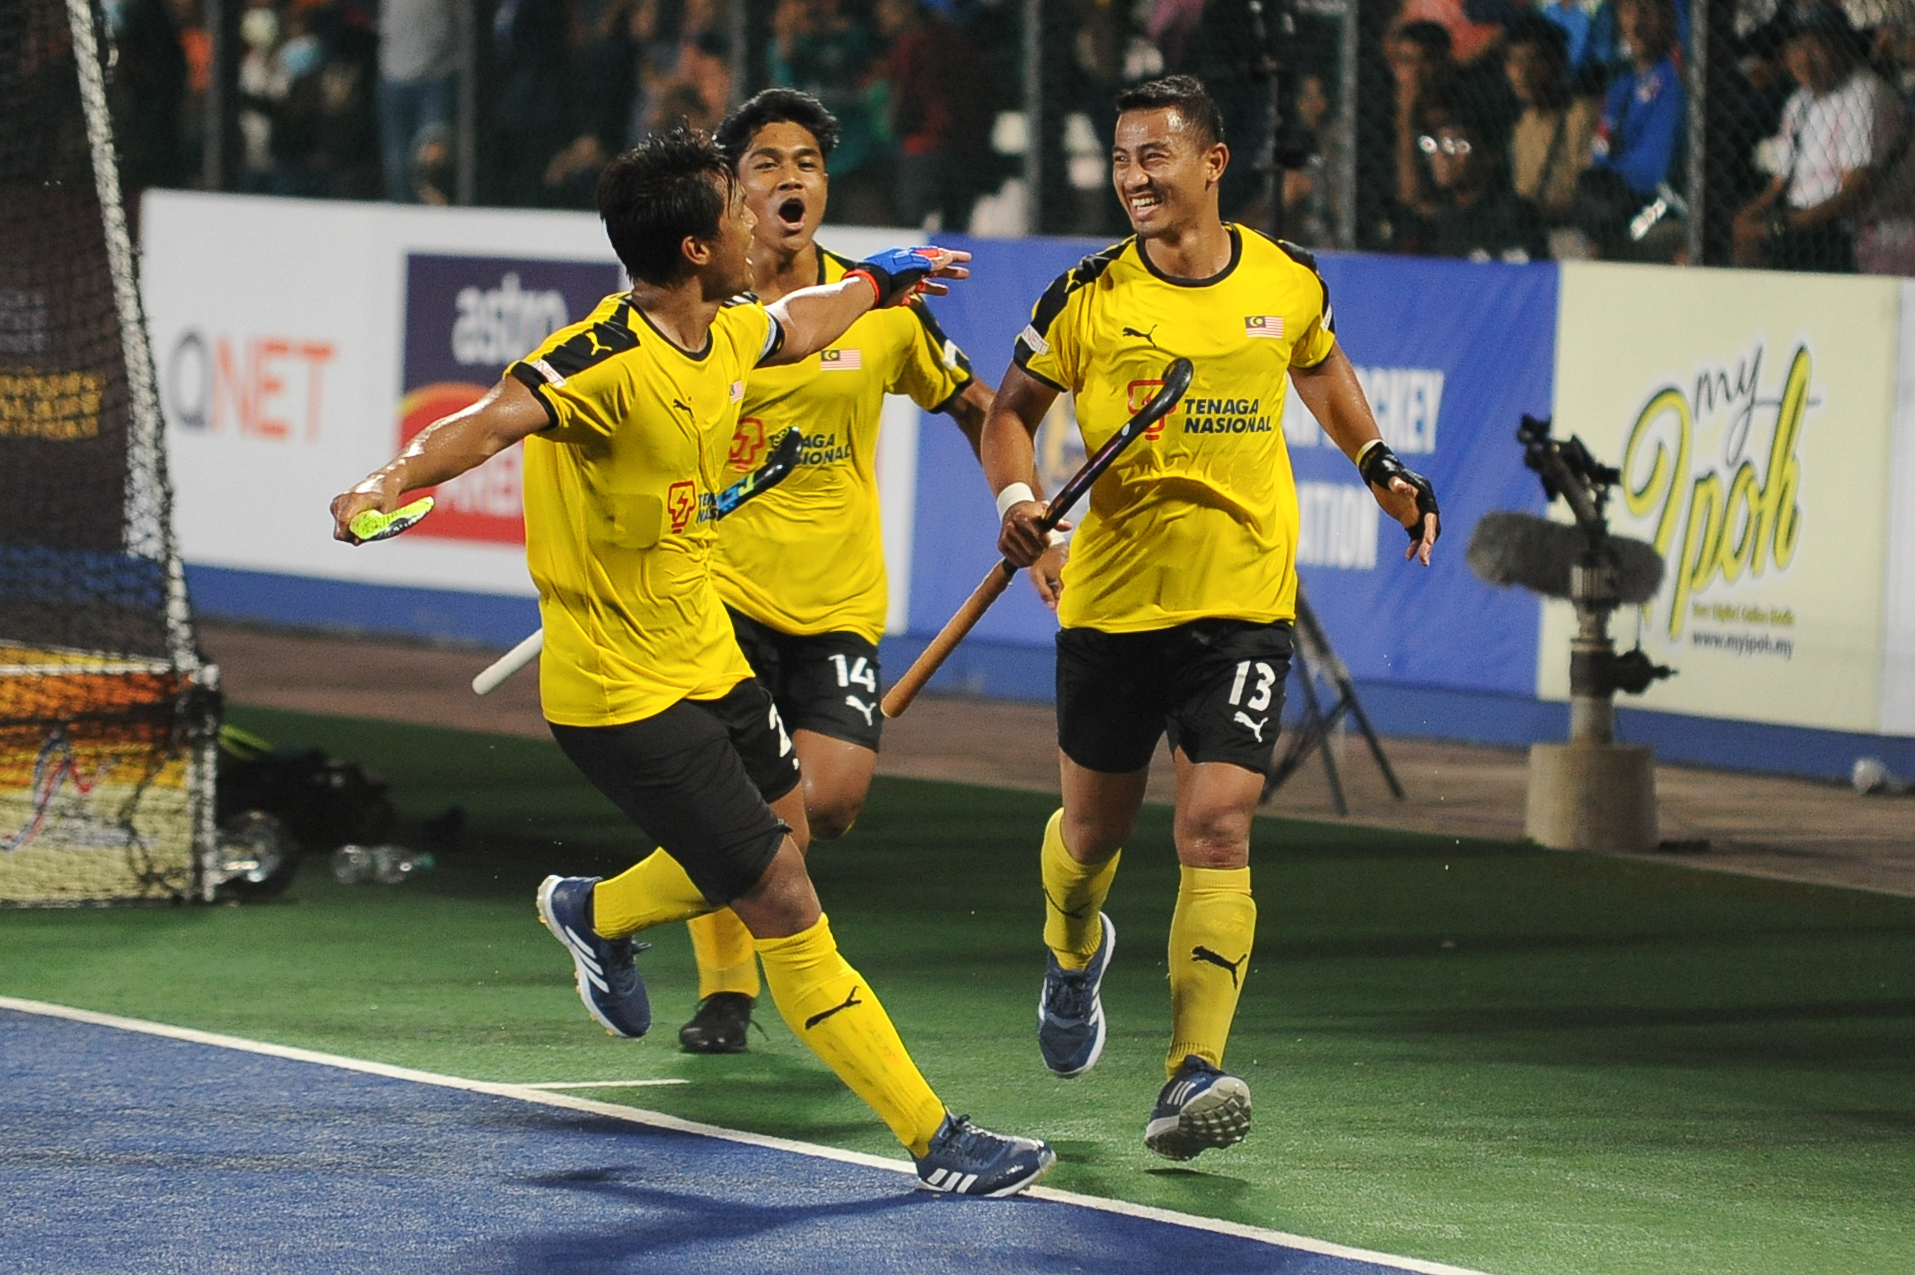 Malaysian players celebrating second goal scored by Firhan Ashari in the 41st minute